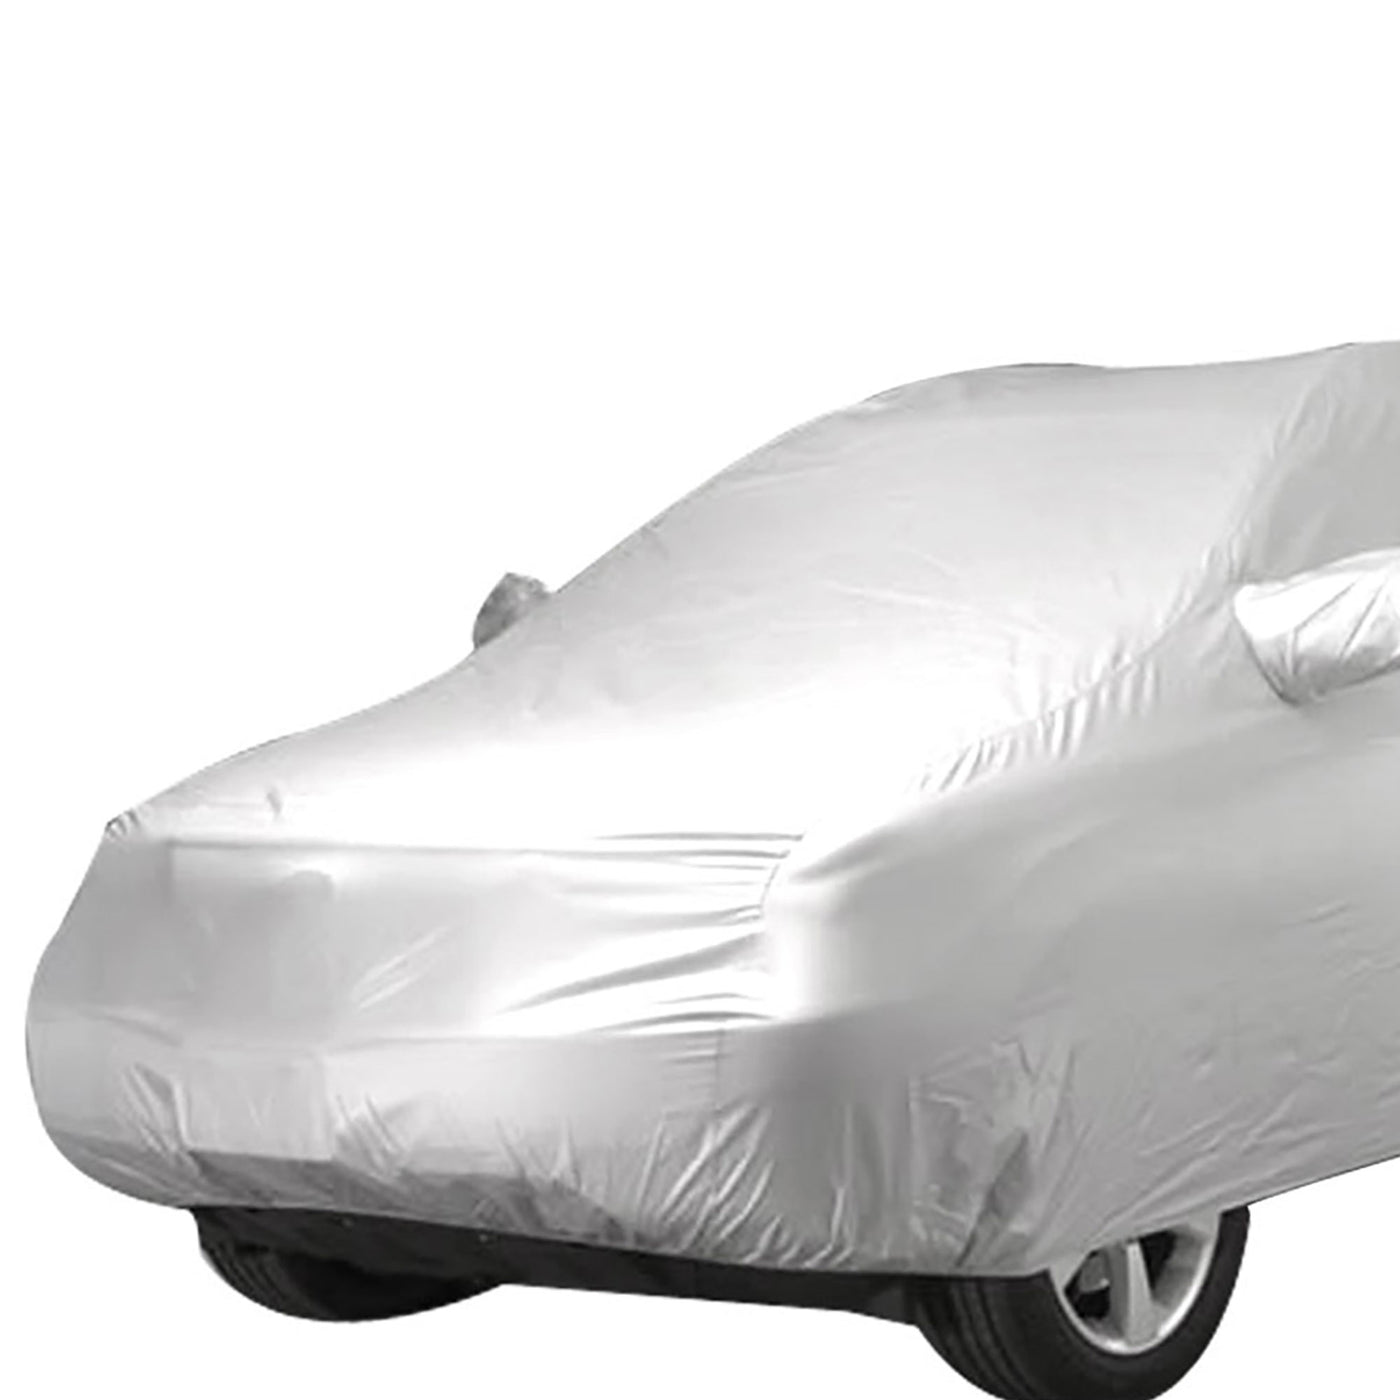 uxcell Uxcell XL Car Cover Waterproof Sun Snow Dust Rain Resistant Protection 5.25M x 1.9M x 1.55M